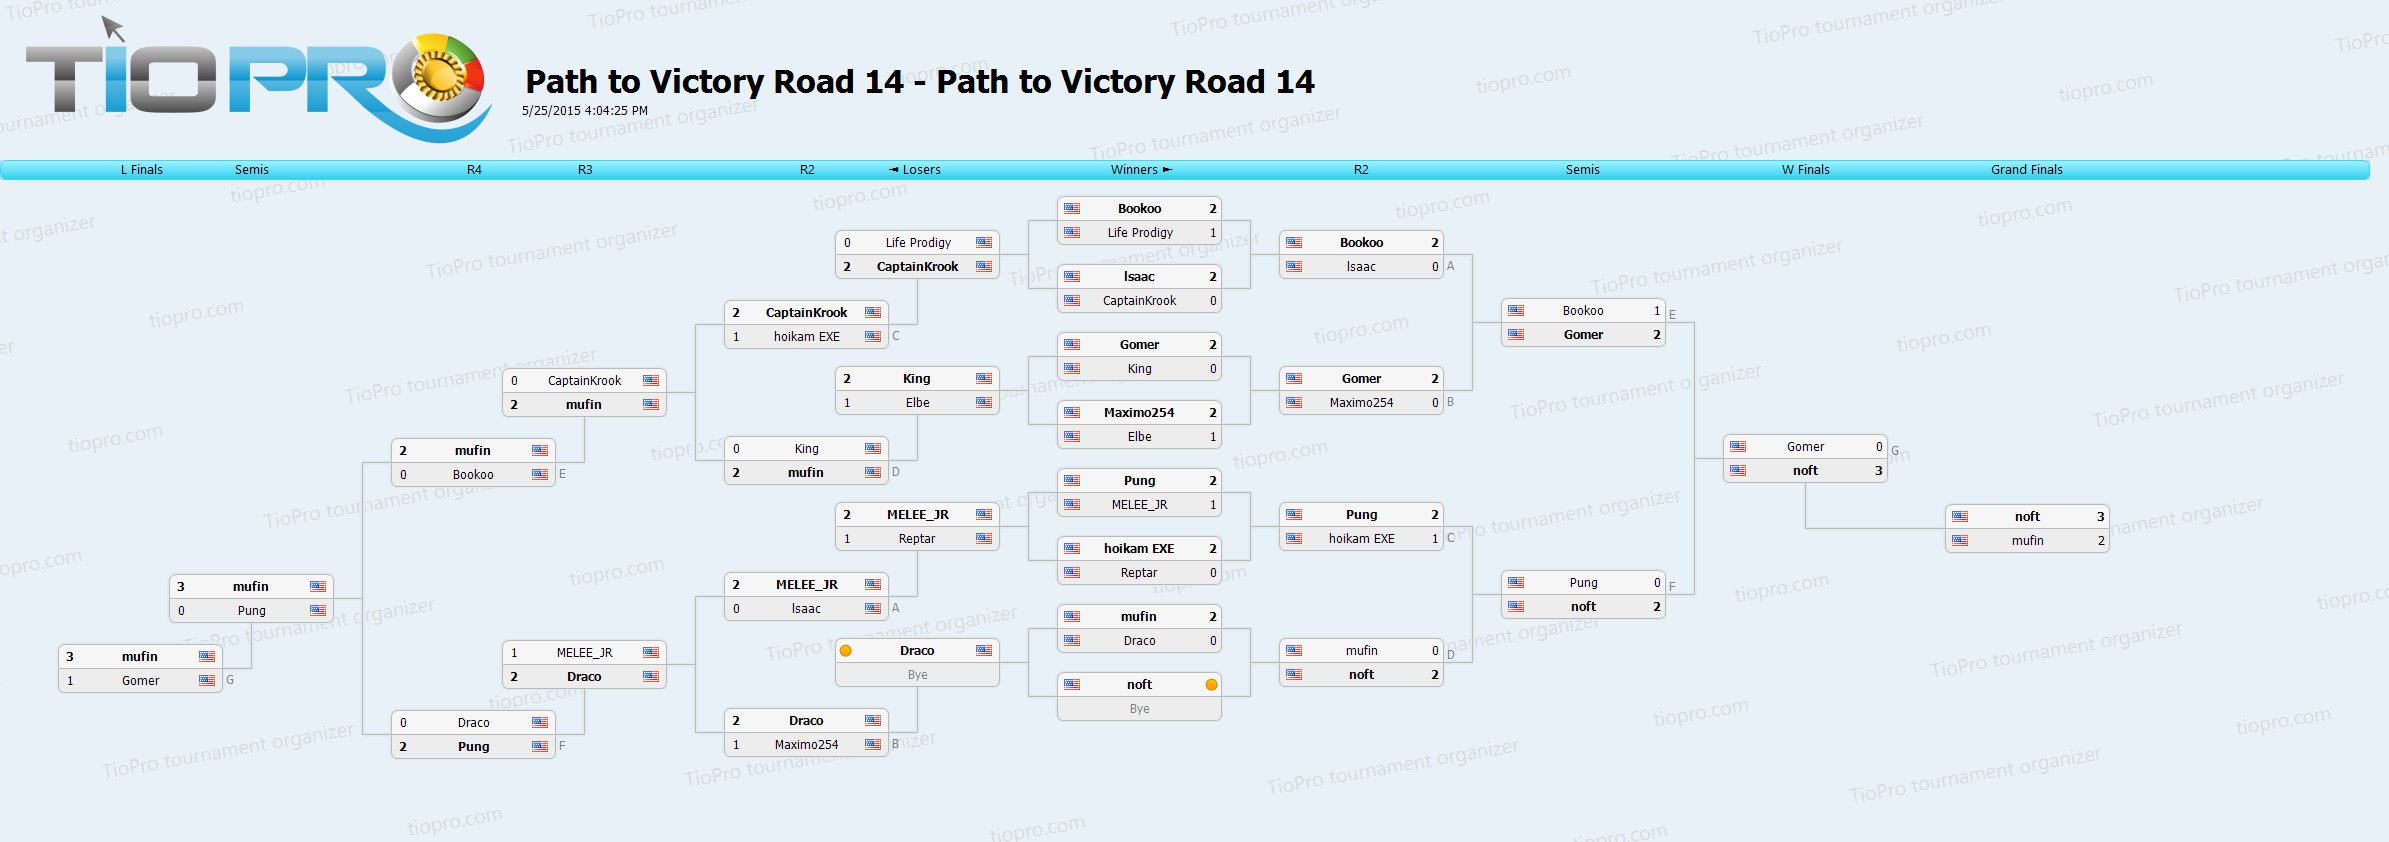 Path to Victory Road 14